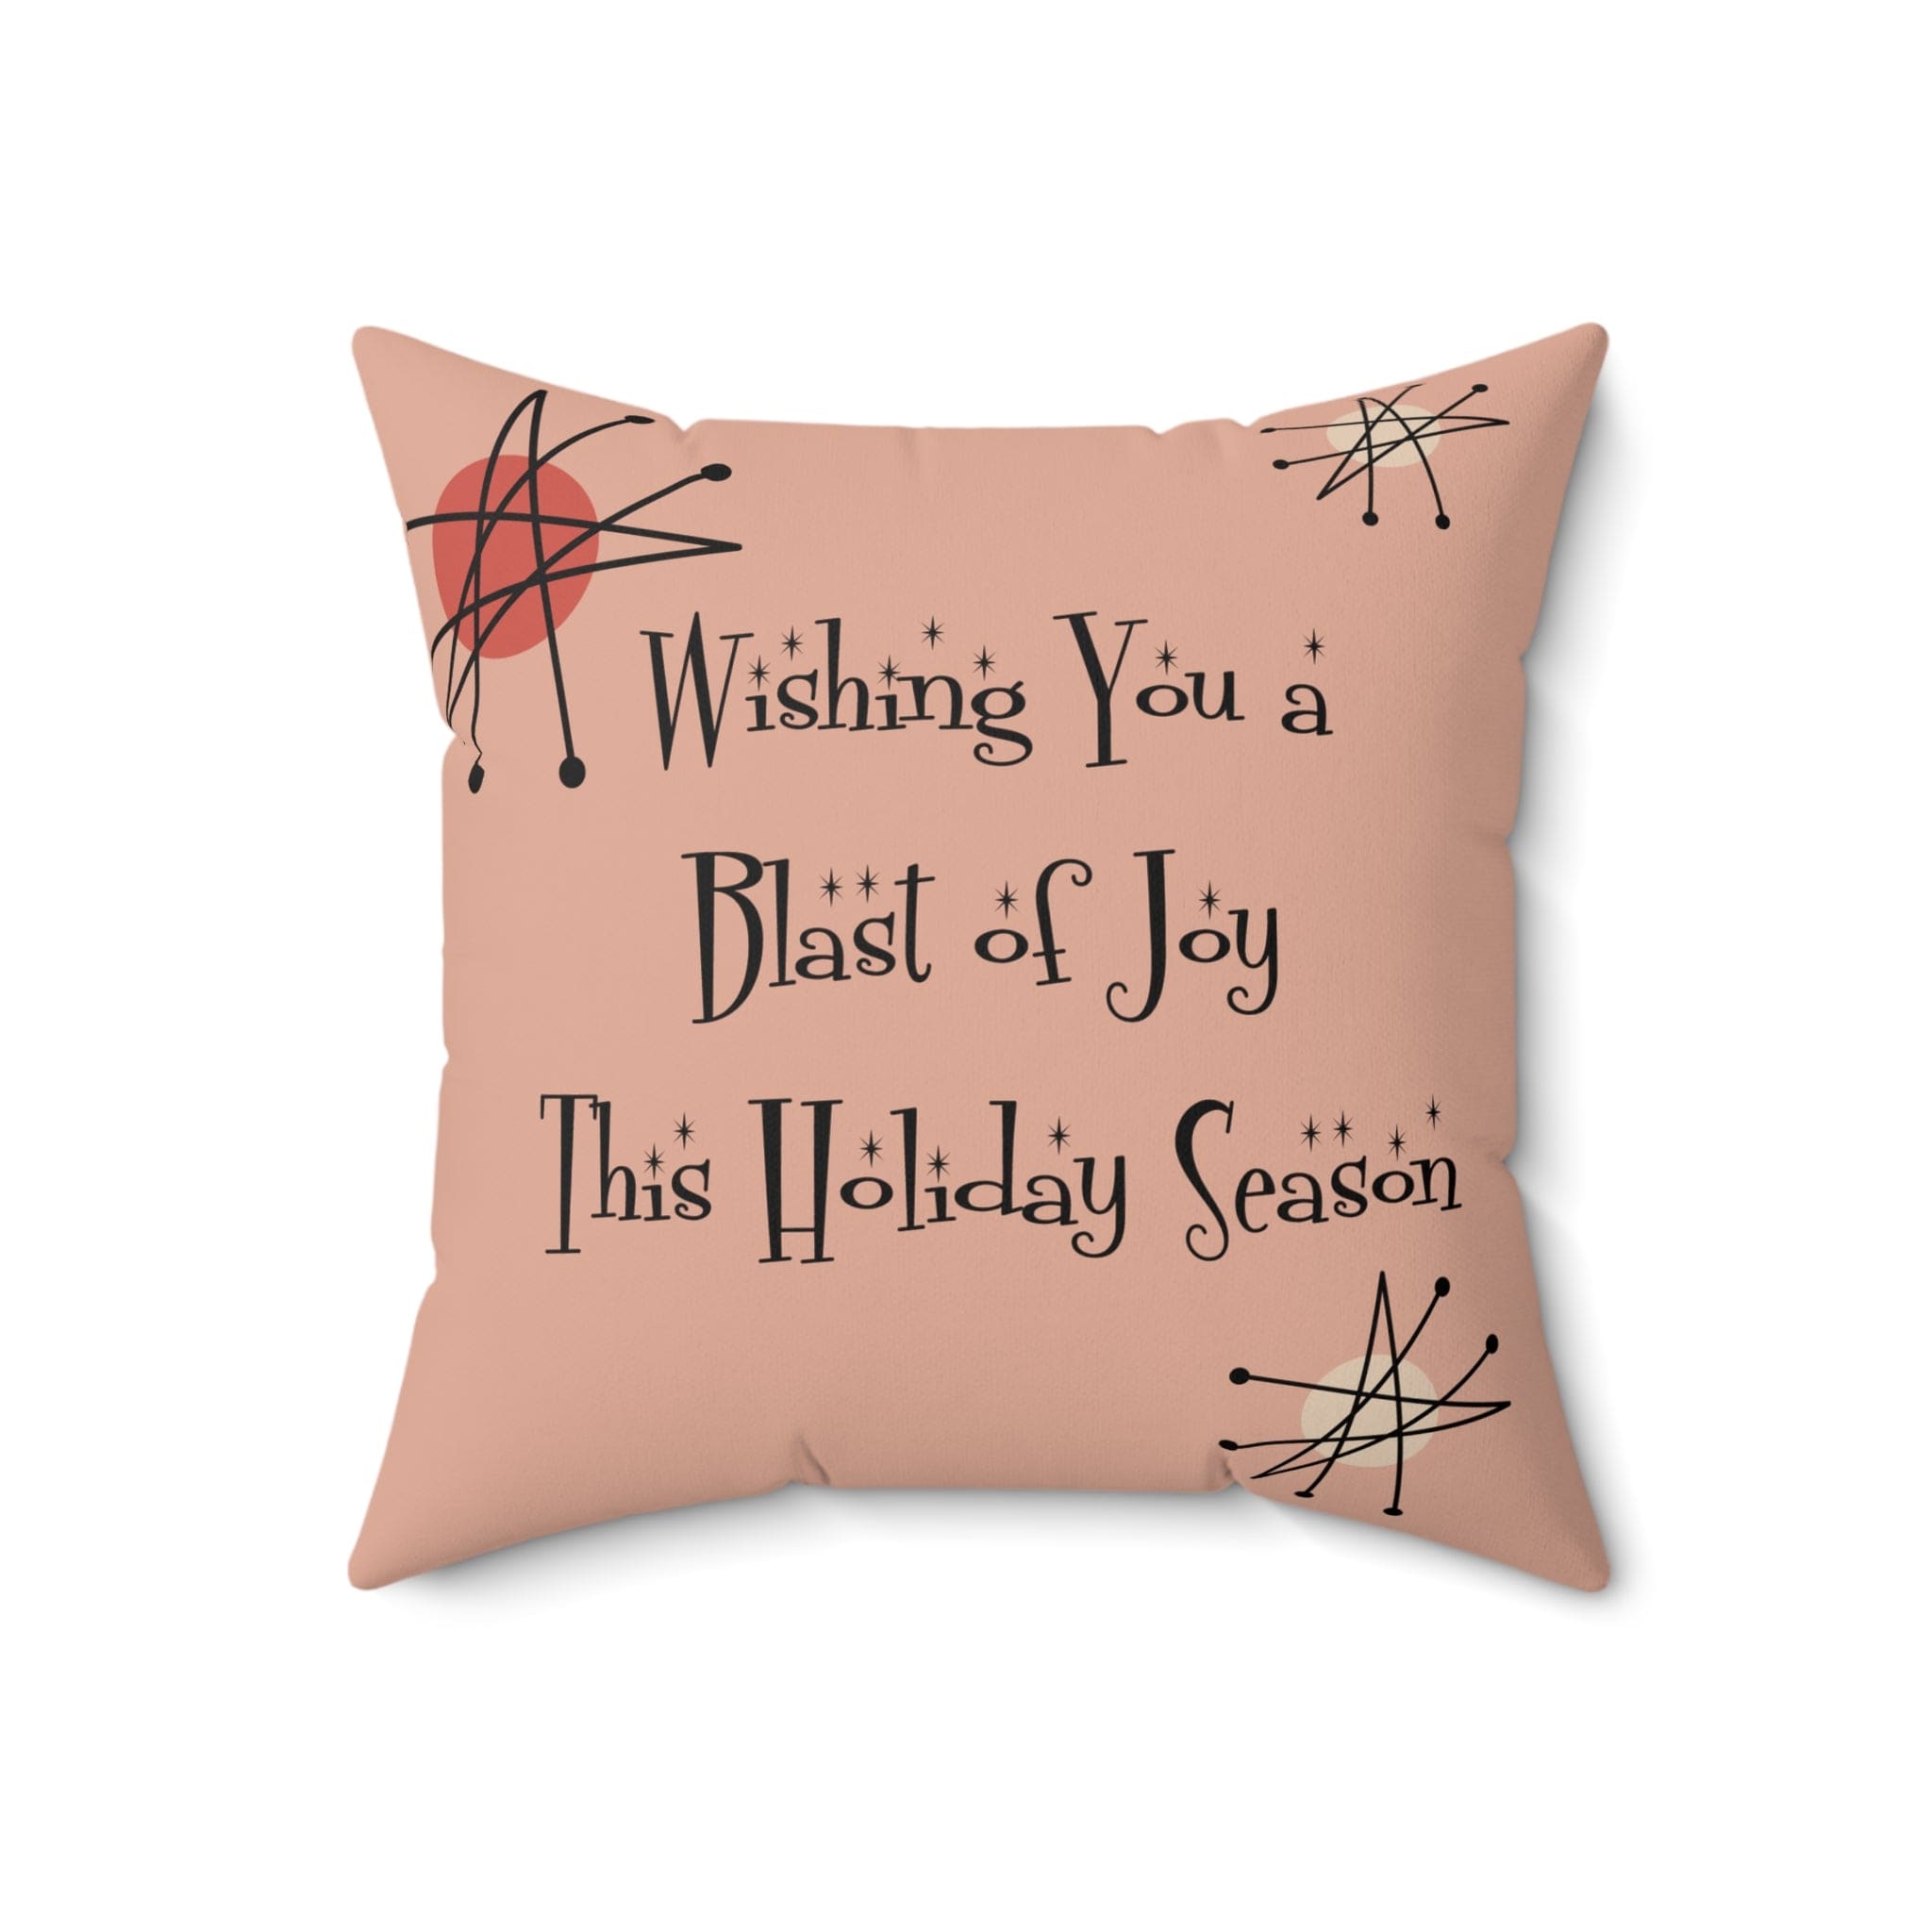 Mid Century Modern Christmas Pillow Gift, Wishing You A Blast Of Joy This Holiday Season, Atomic Cat, Kitschy Style Pillow And Insert Home Decor